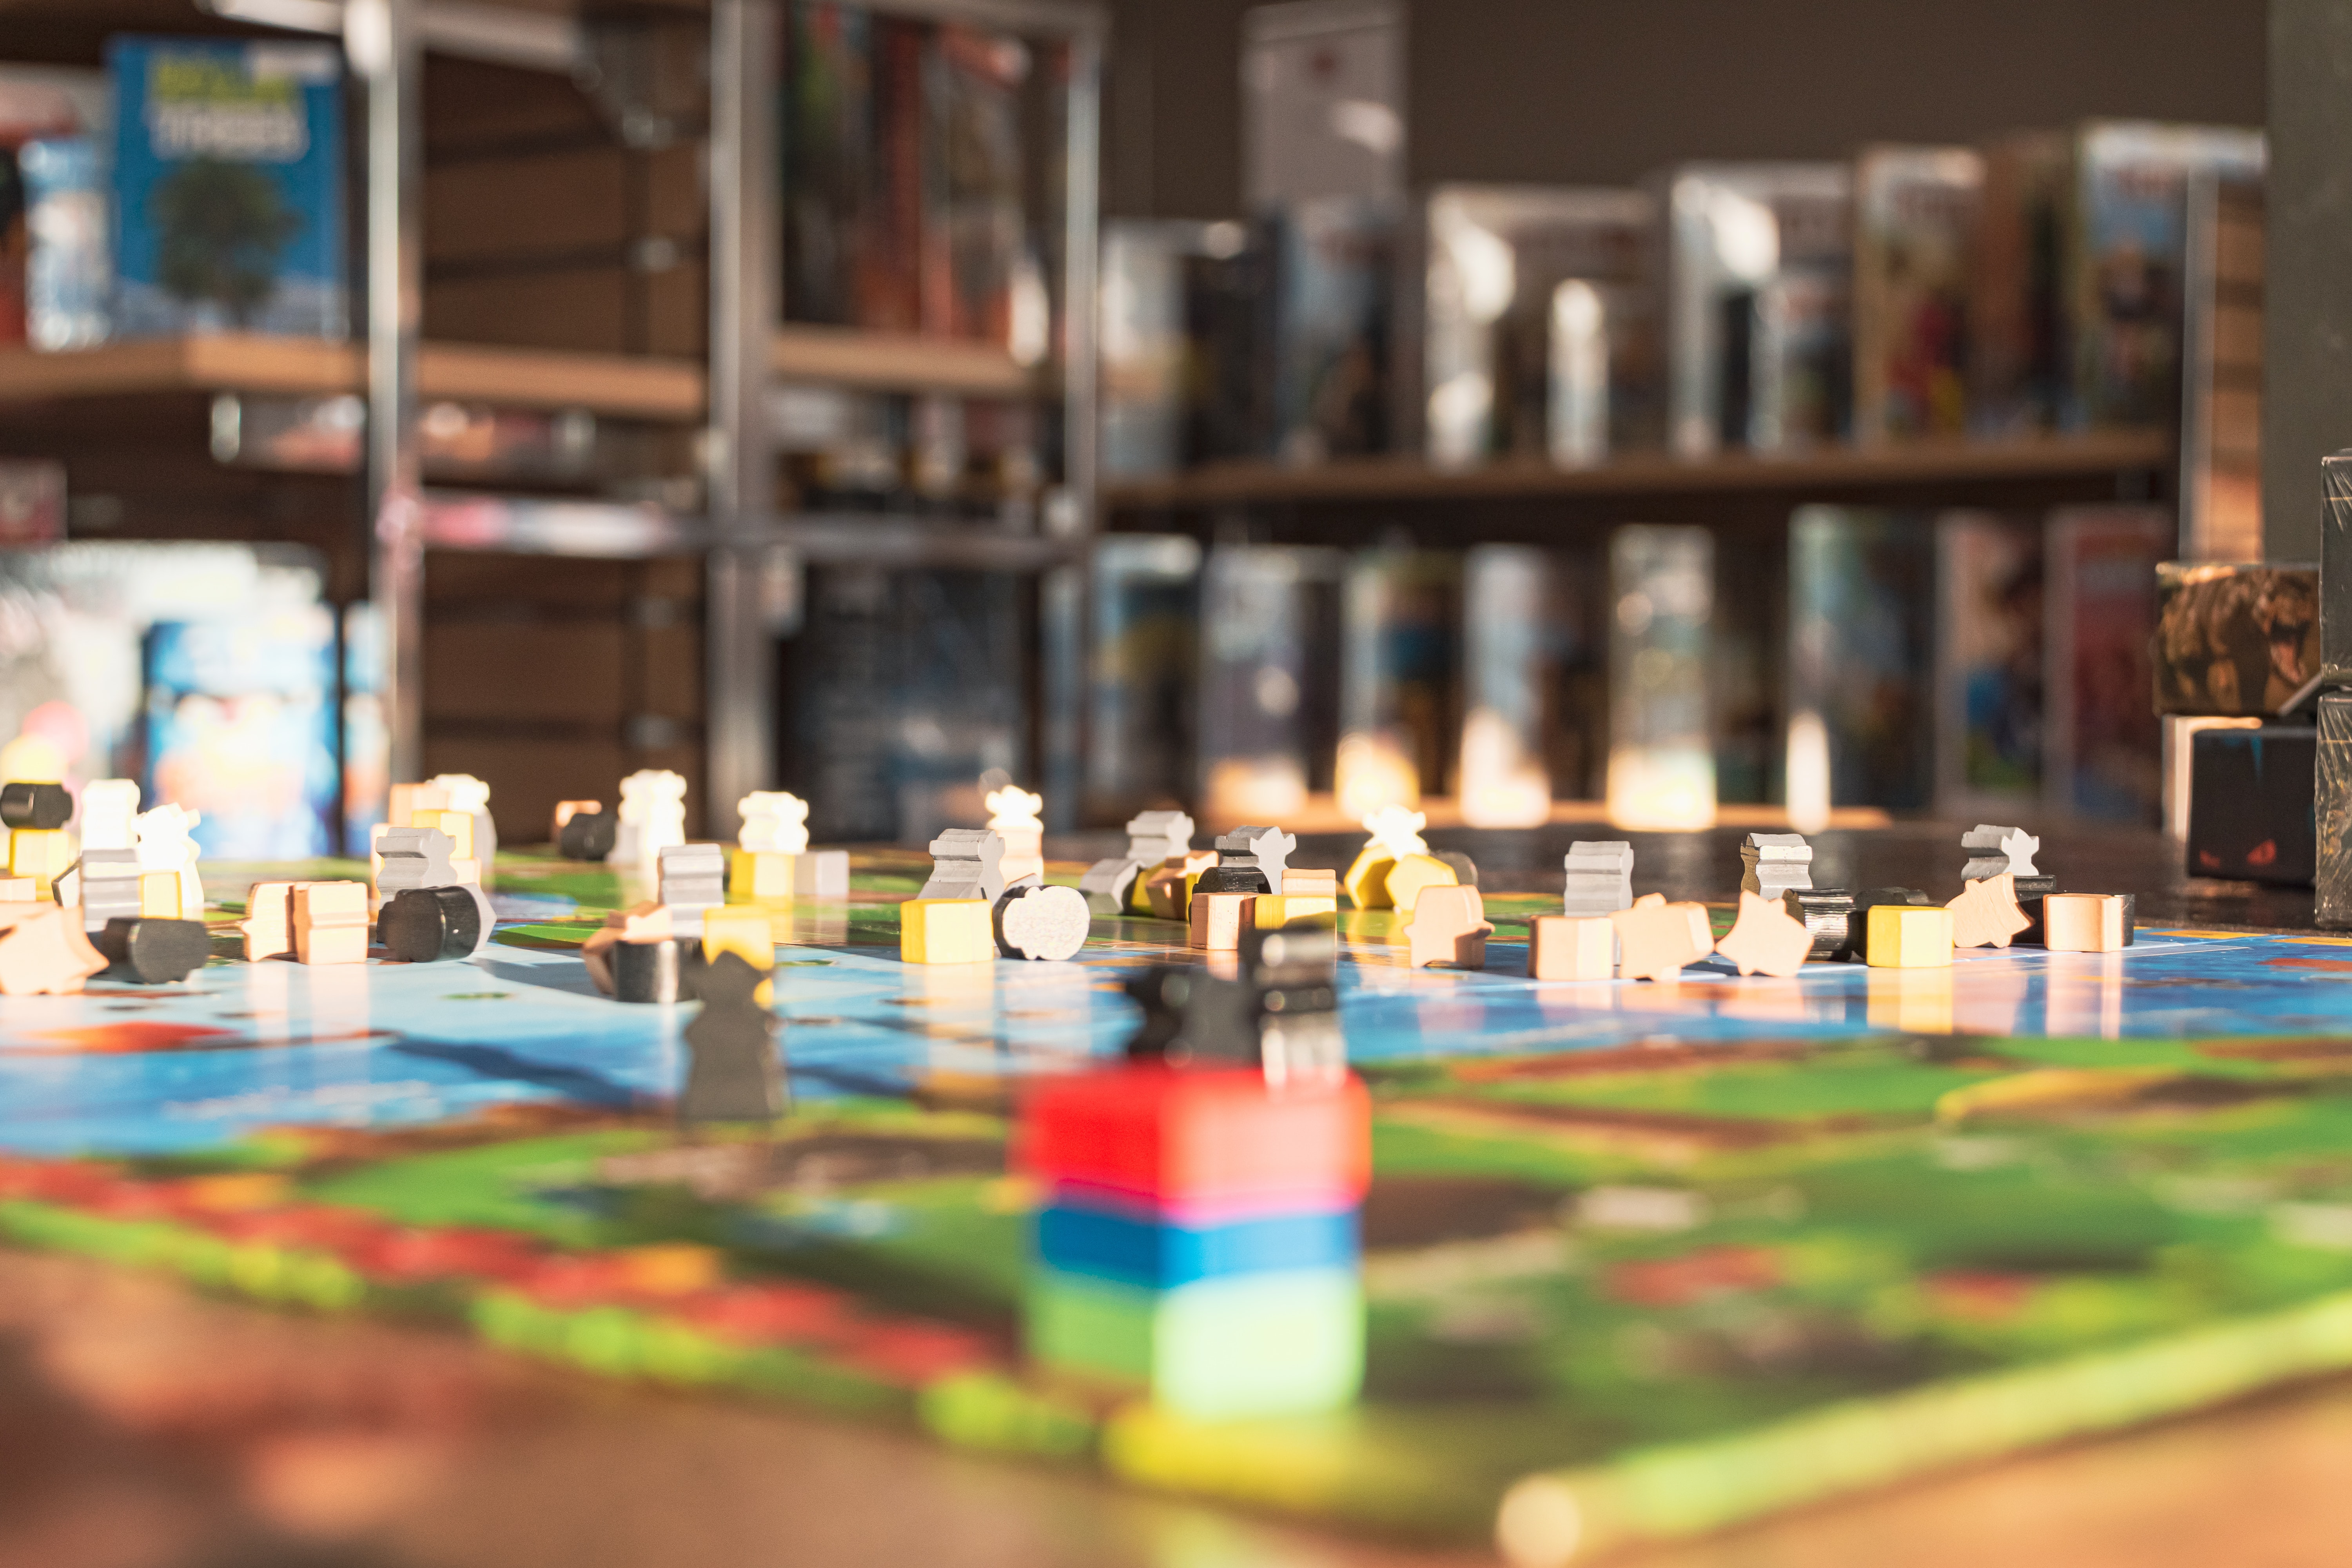 Unconventional learning Part2 – Learn, have fun and unplug with the help of Board Games